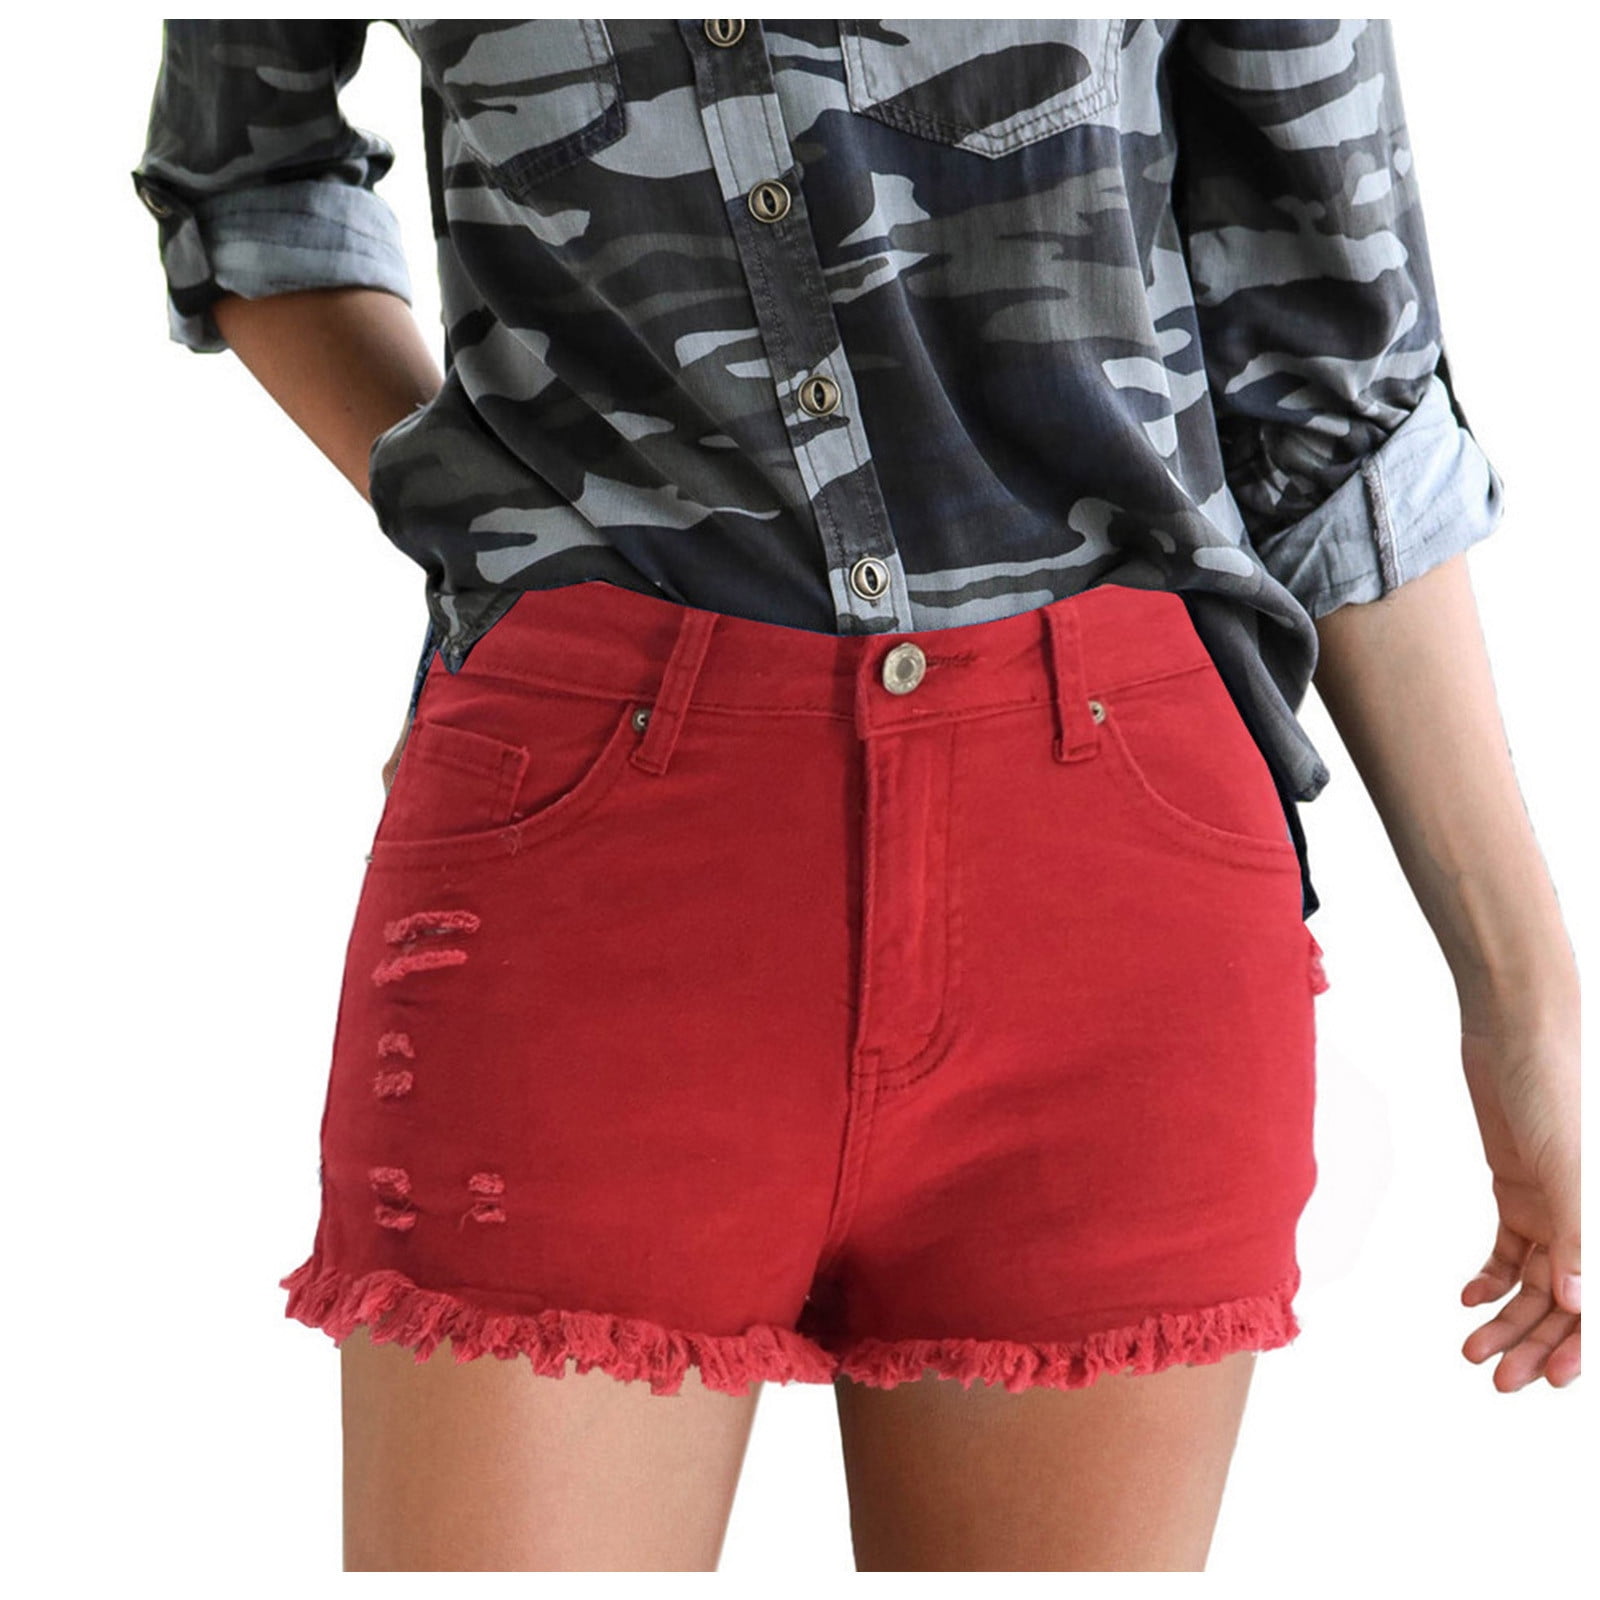 Sentuca Ripped Jean Shorts For Women High Waisted Streetwear Distressed